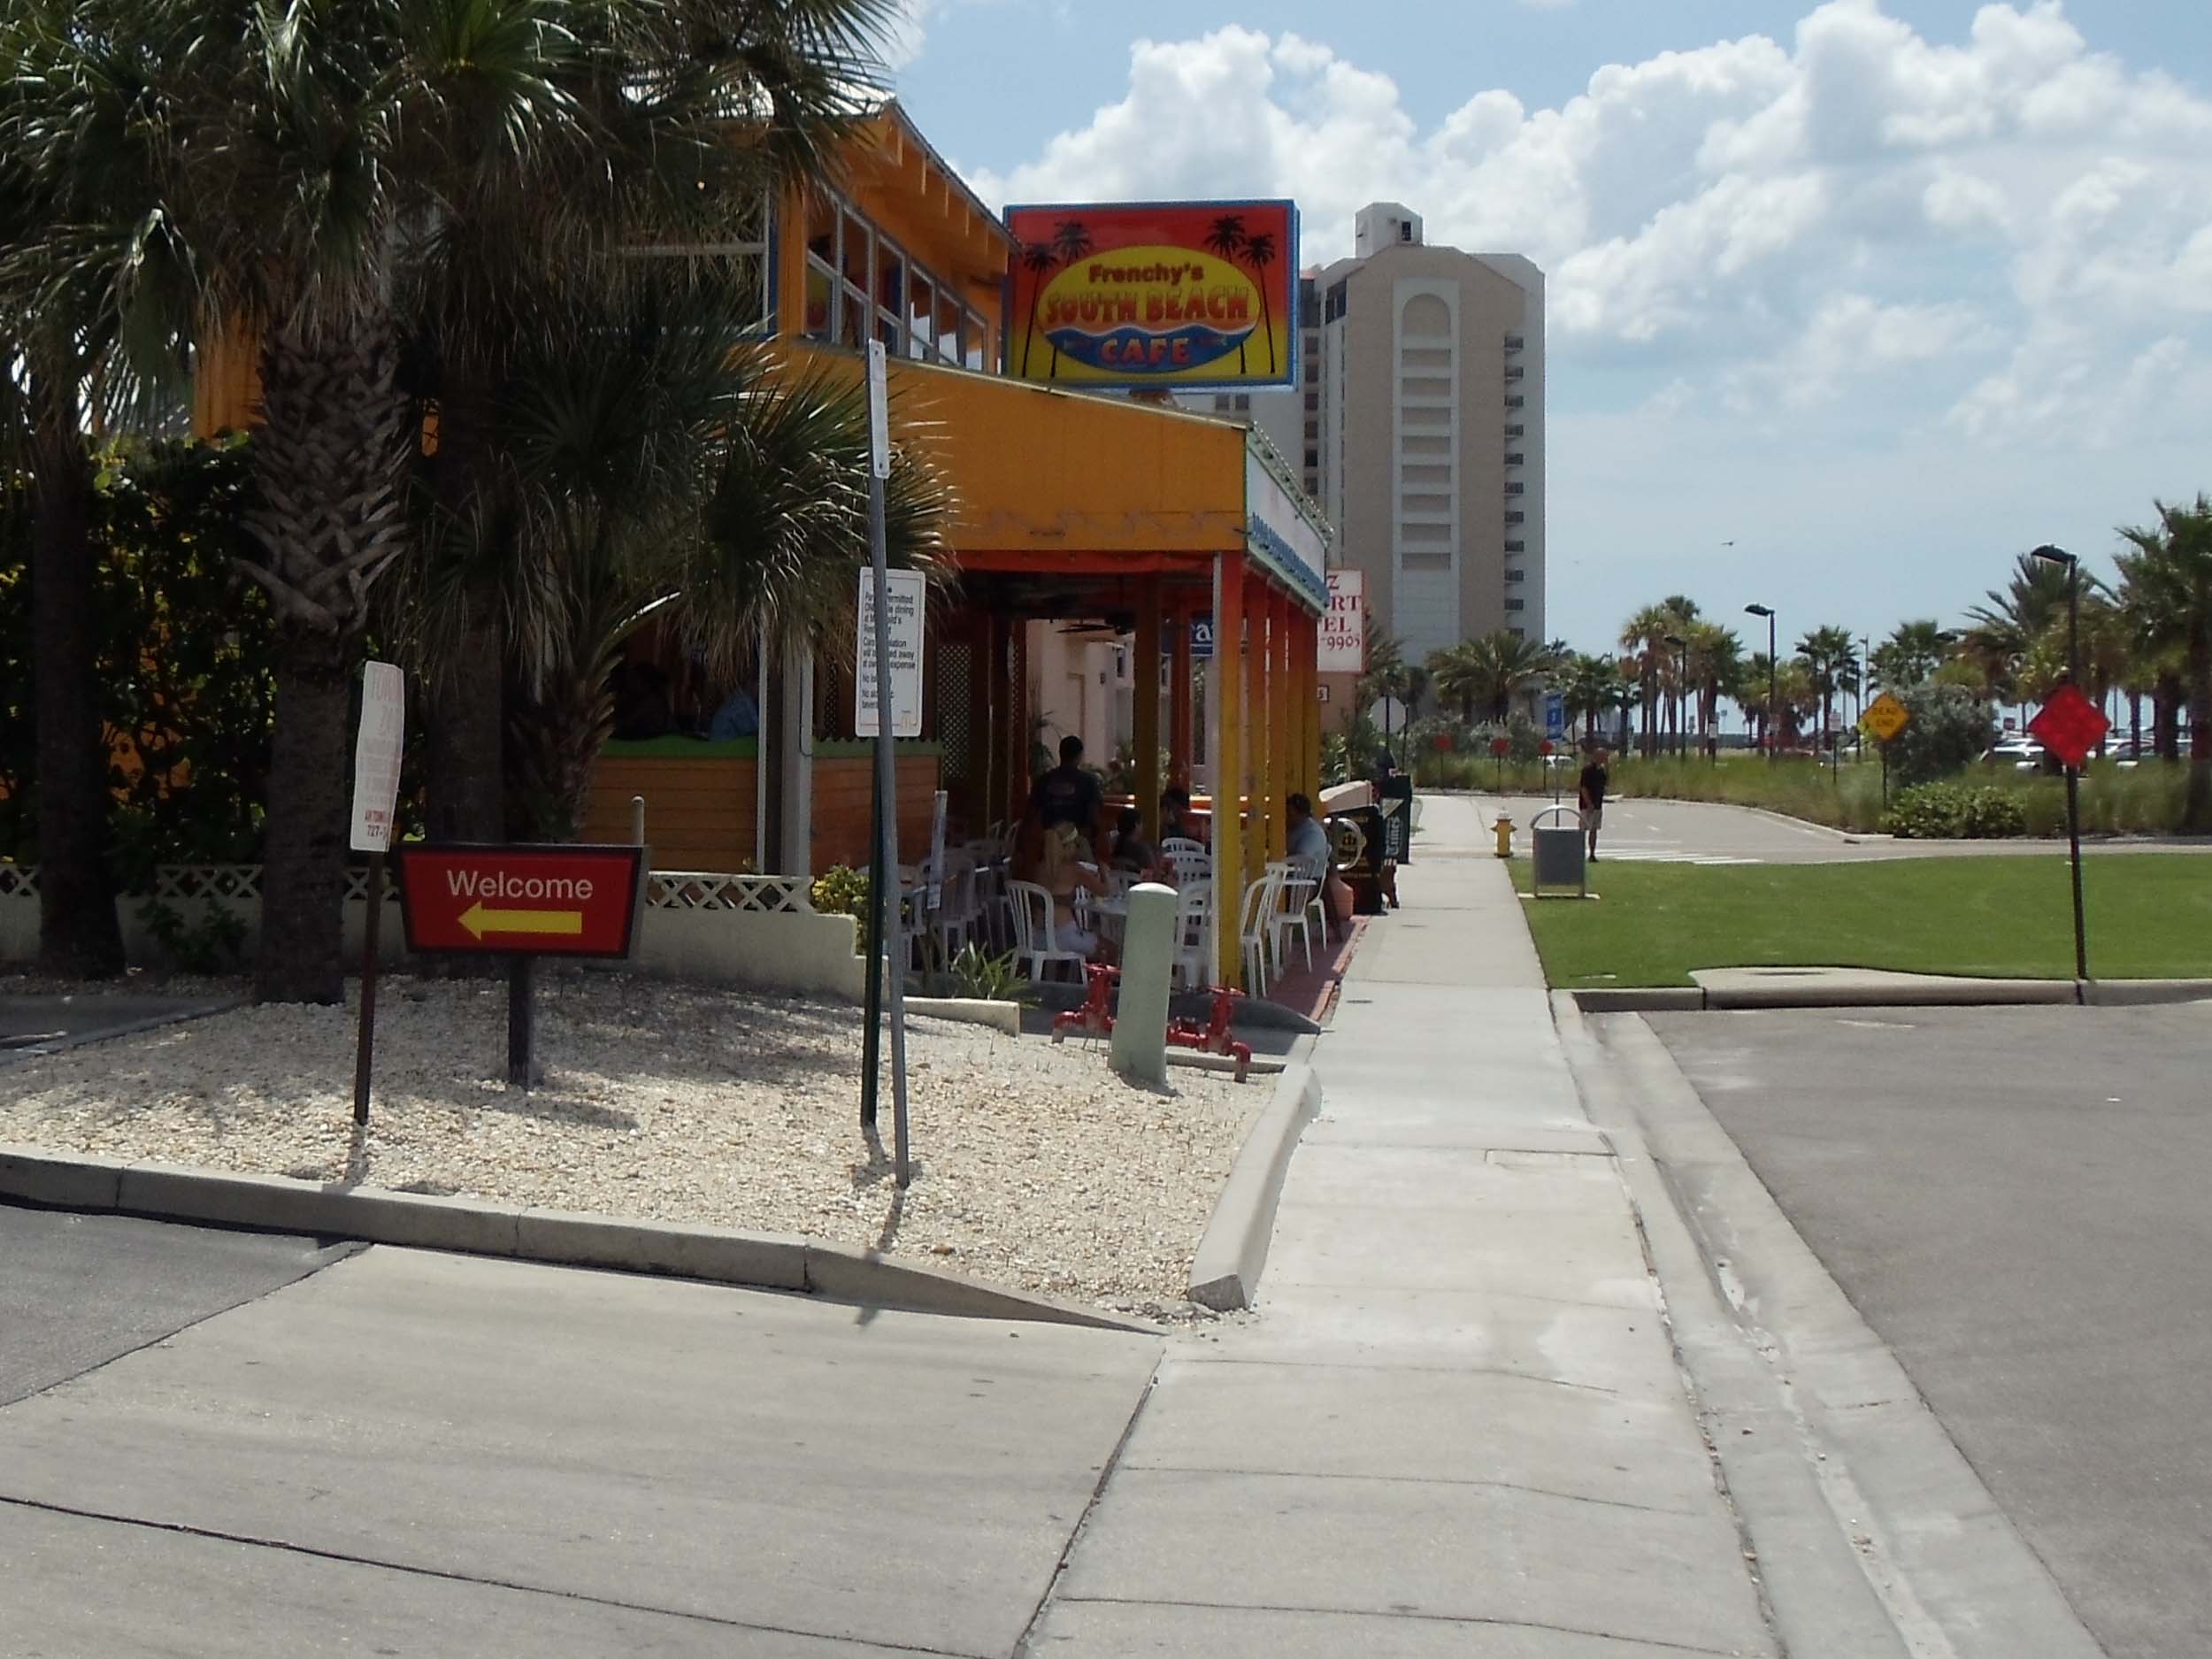 Frenchy's South Beach Cafe 